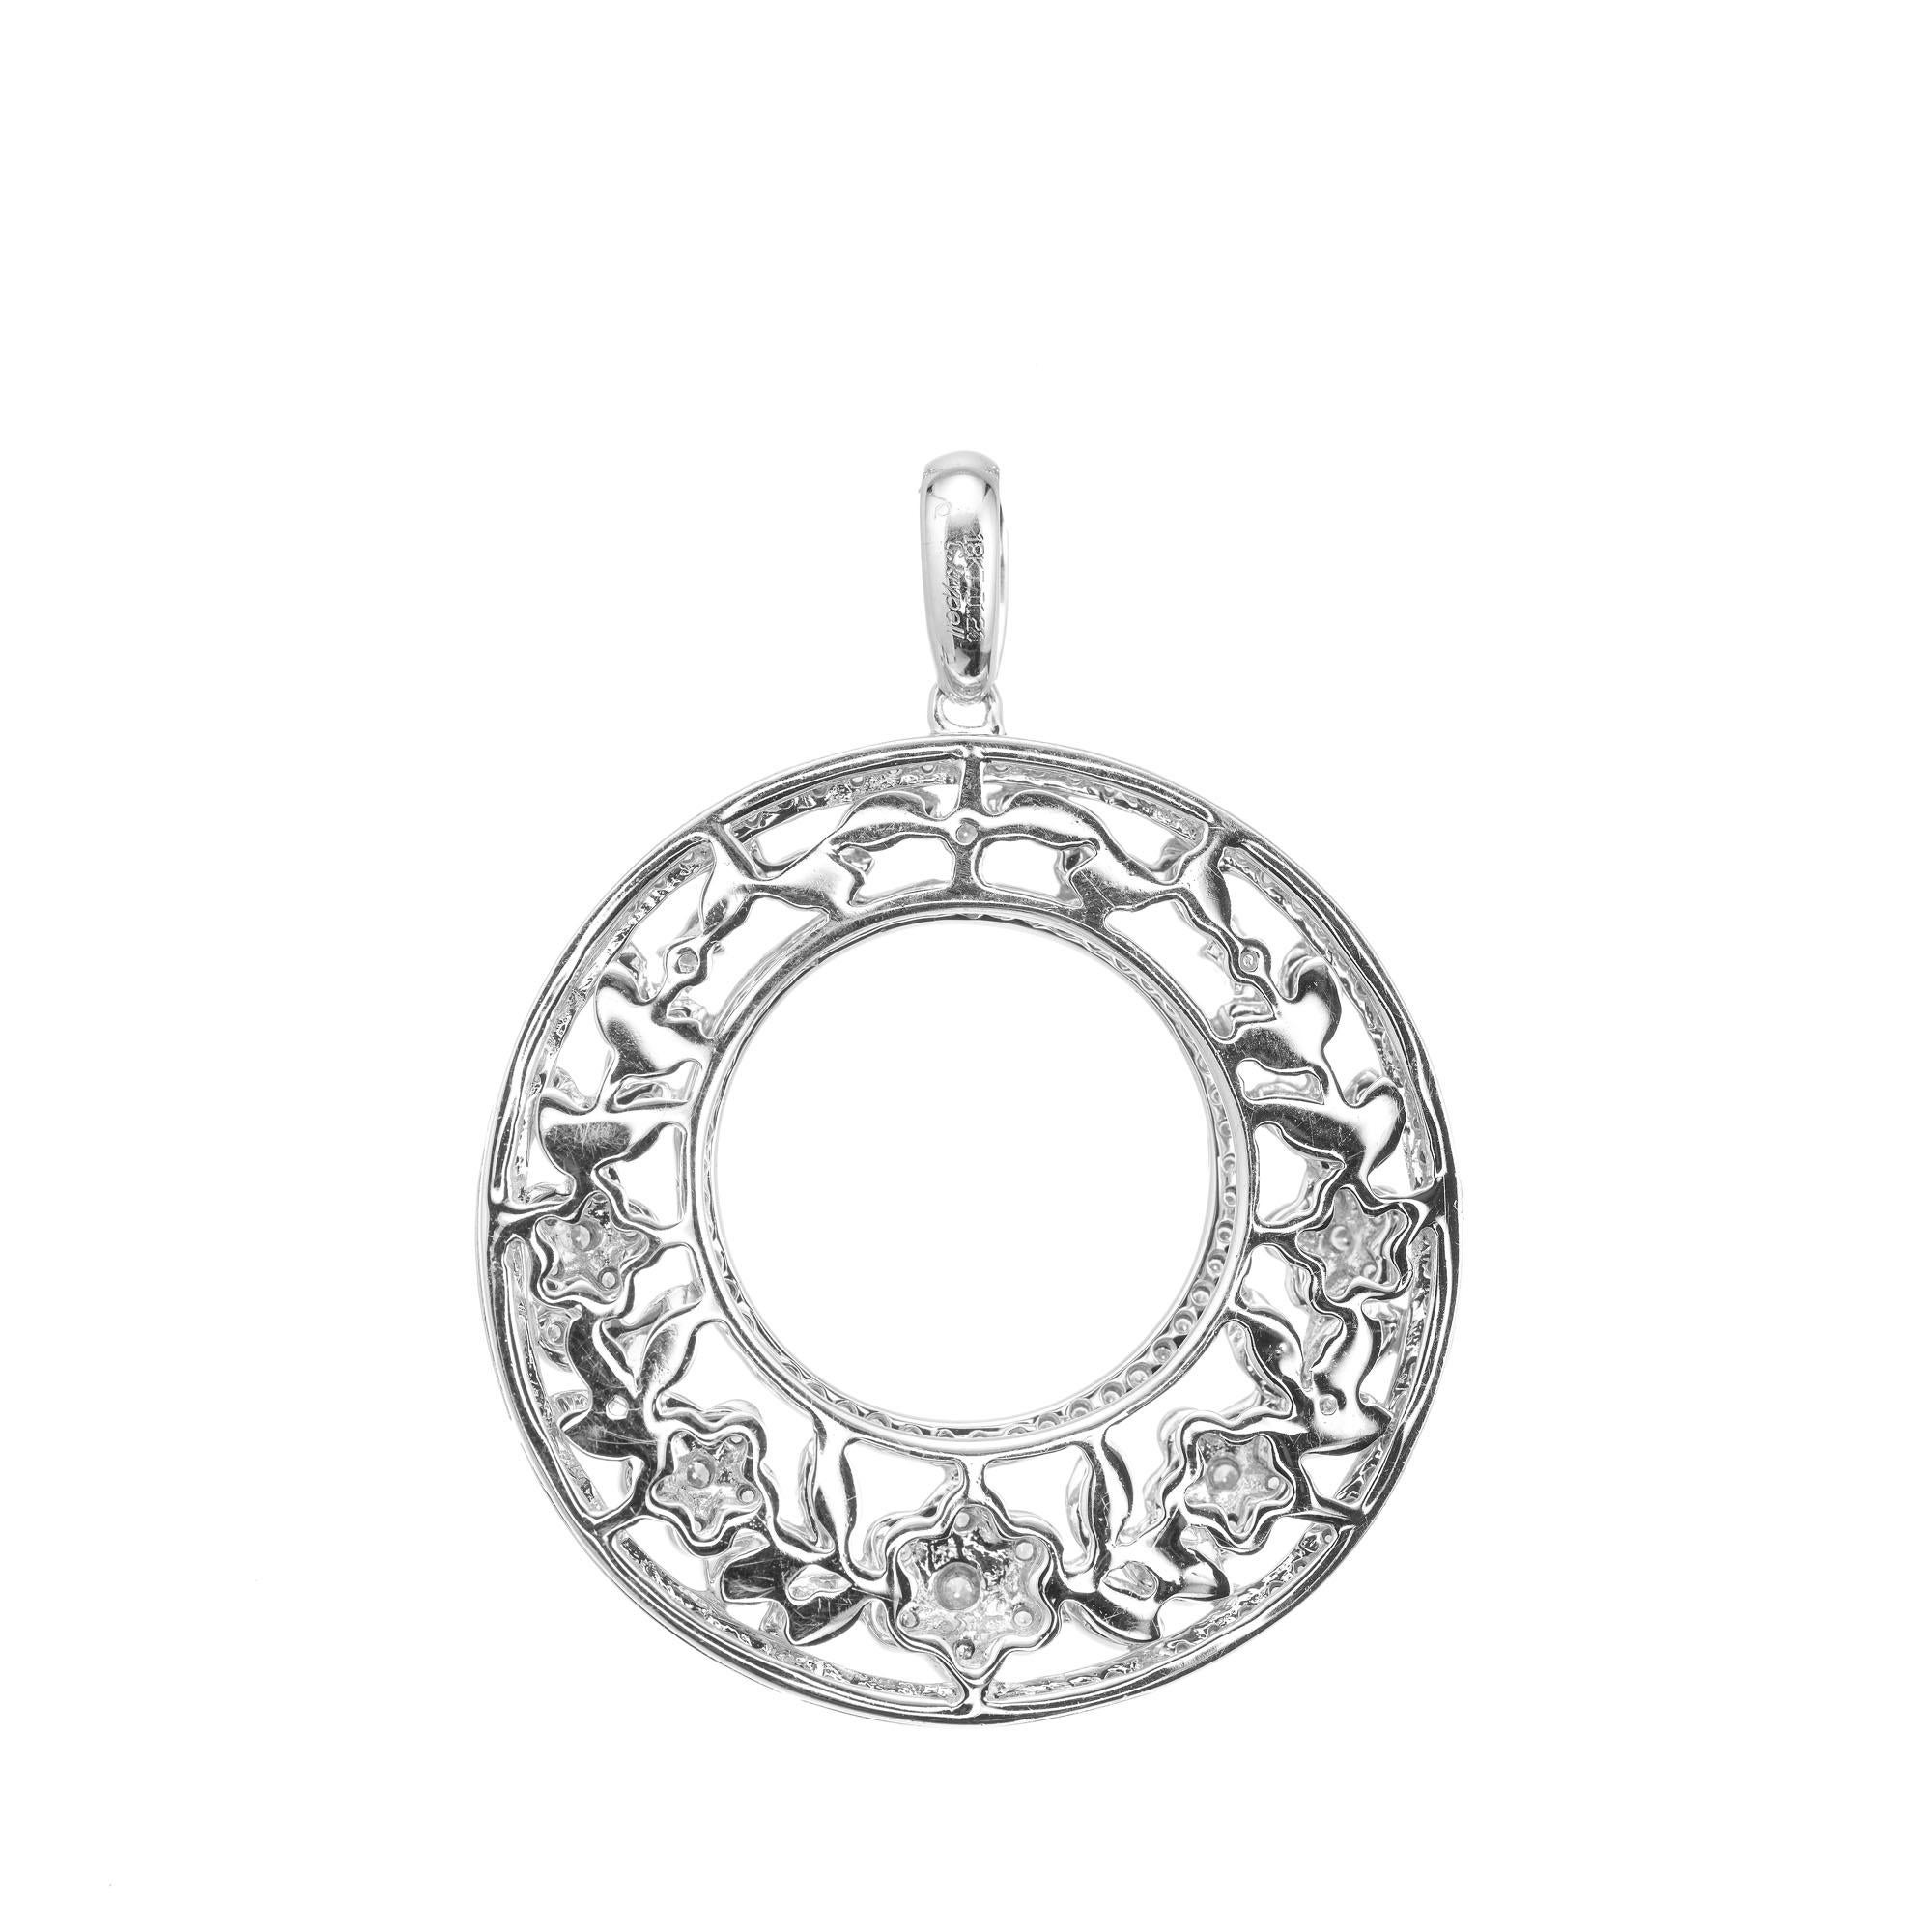 Charles Krypell white gold micro pave diamond wreath circle pendant. Set in 18k white gold with 1.20cts of round accent diamonds. 

Full cut diamonds, approx. total weight 1.20cts, F, VS
18k White Gold
Stamped: D 1.20 C Krypell 18k+
8.6 grams  
5 x